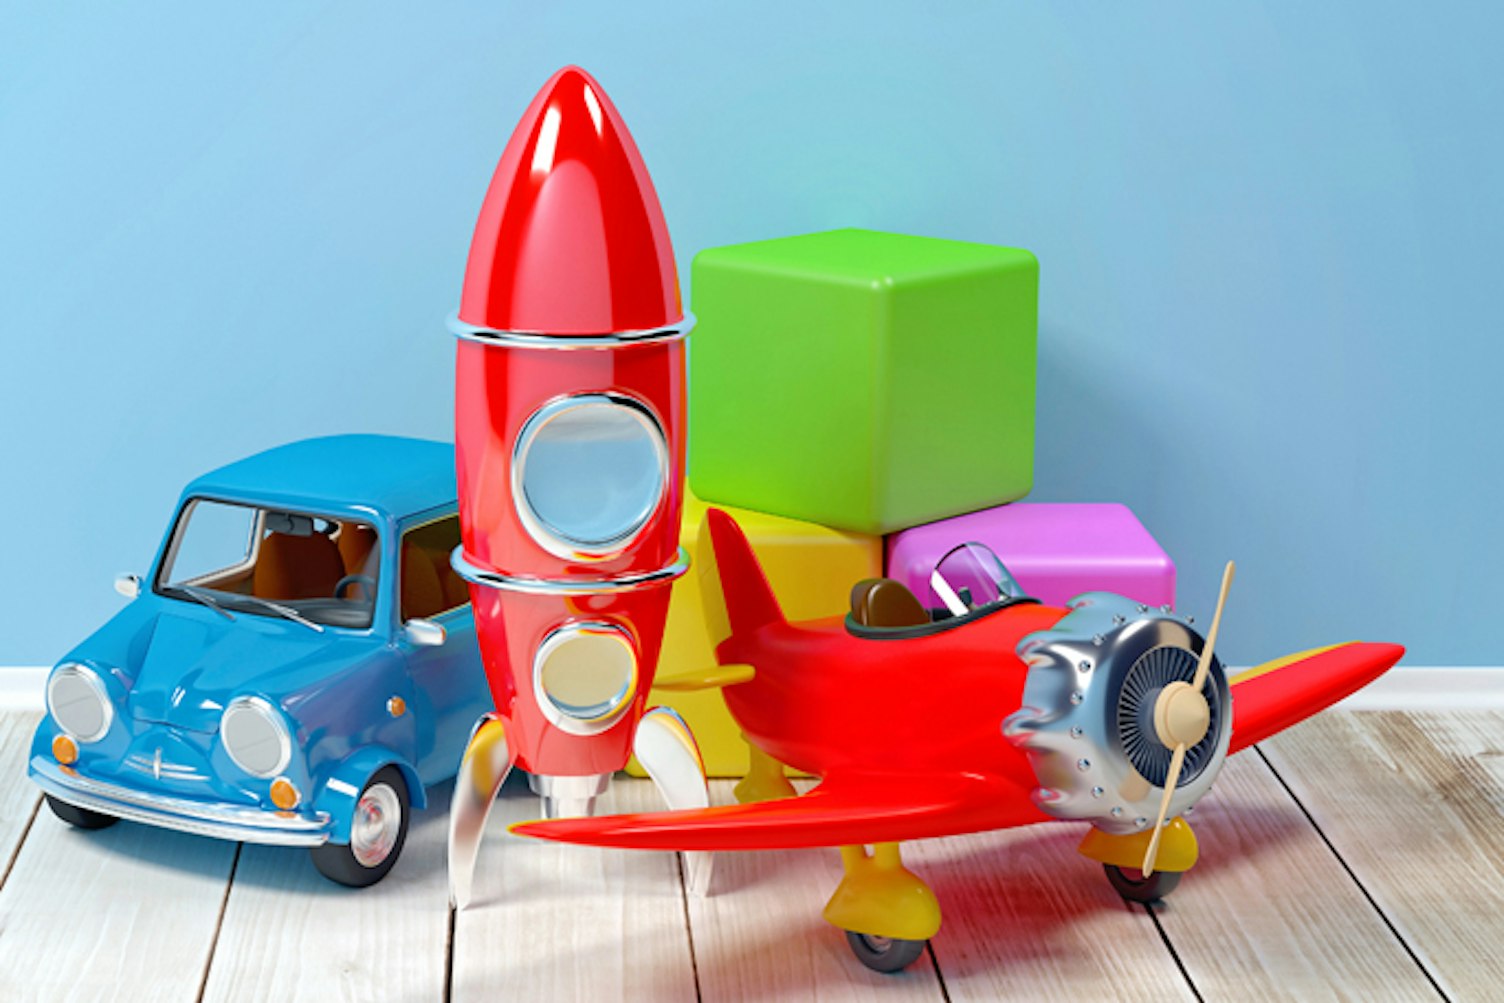 Toy car plane and rocket in plastic 456px